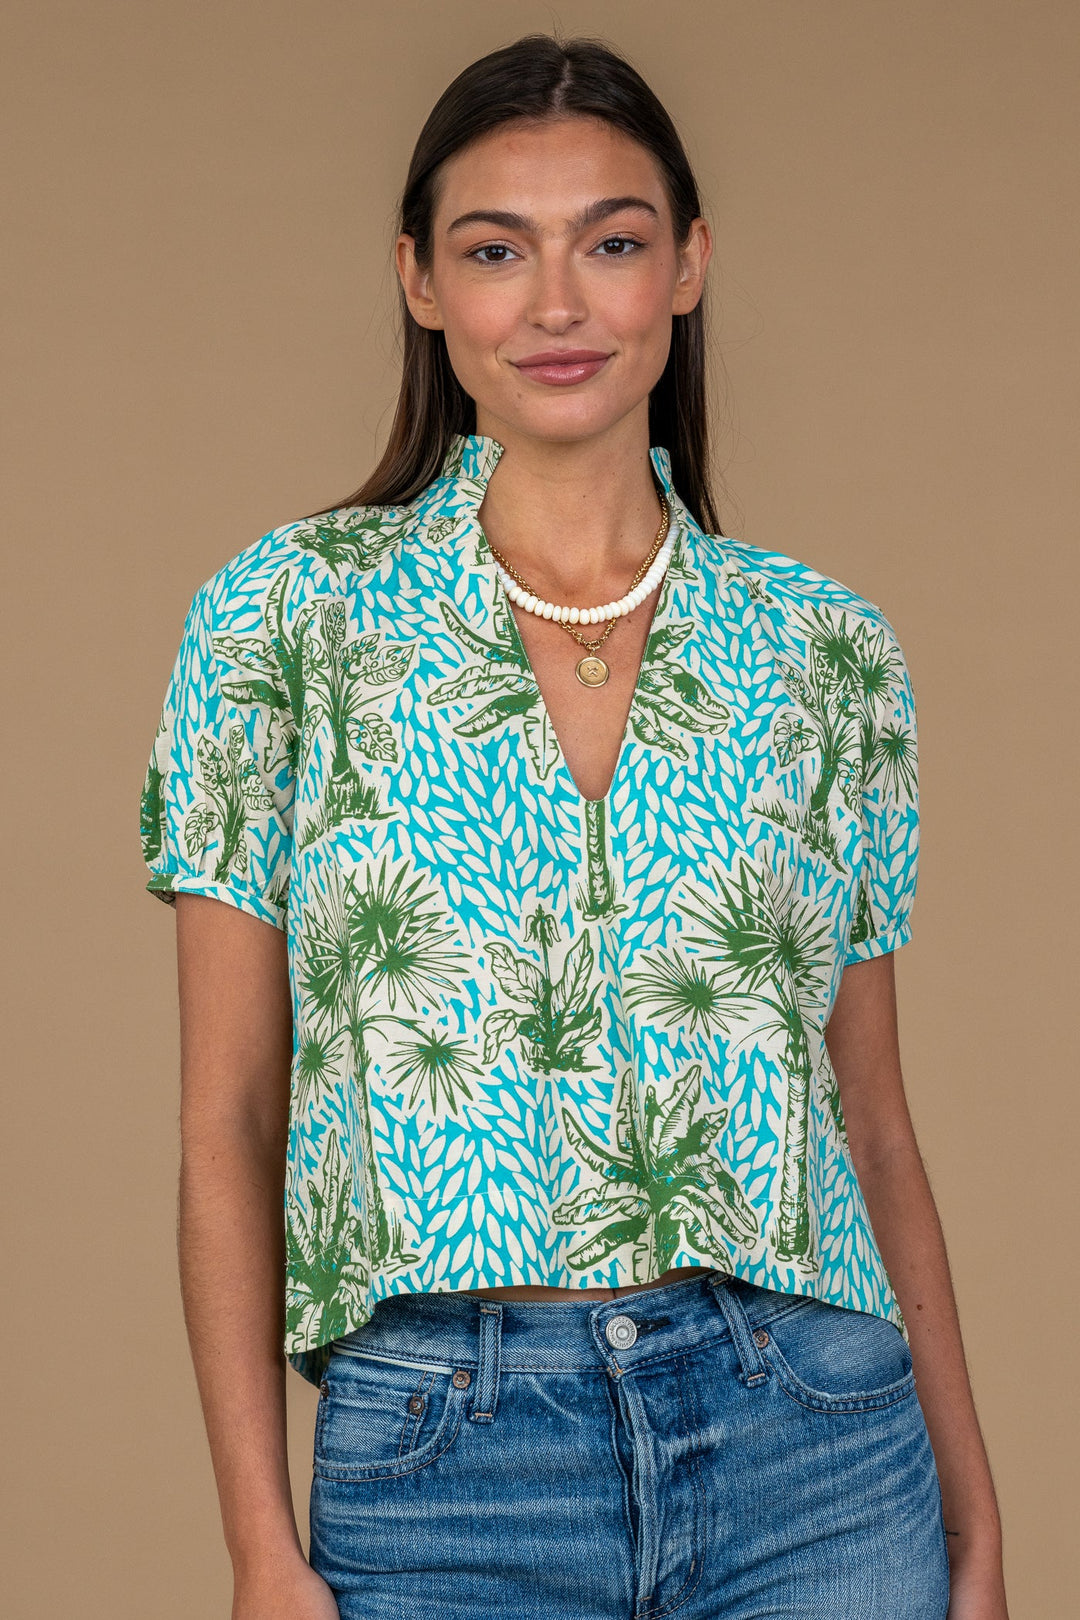 Elizabeth Top in Island Palm – How'd She Do That?